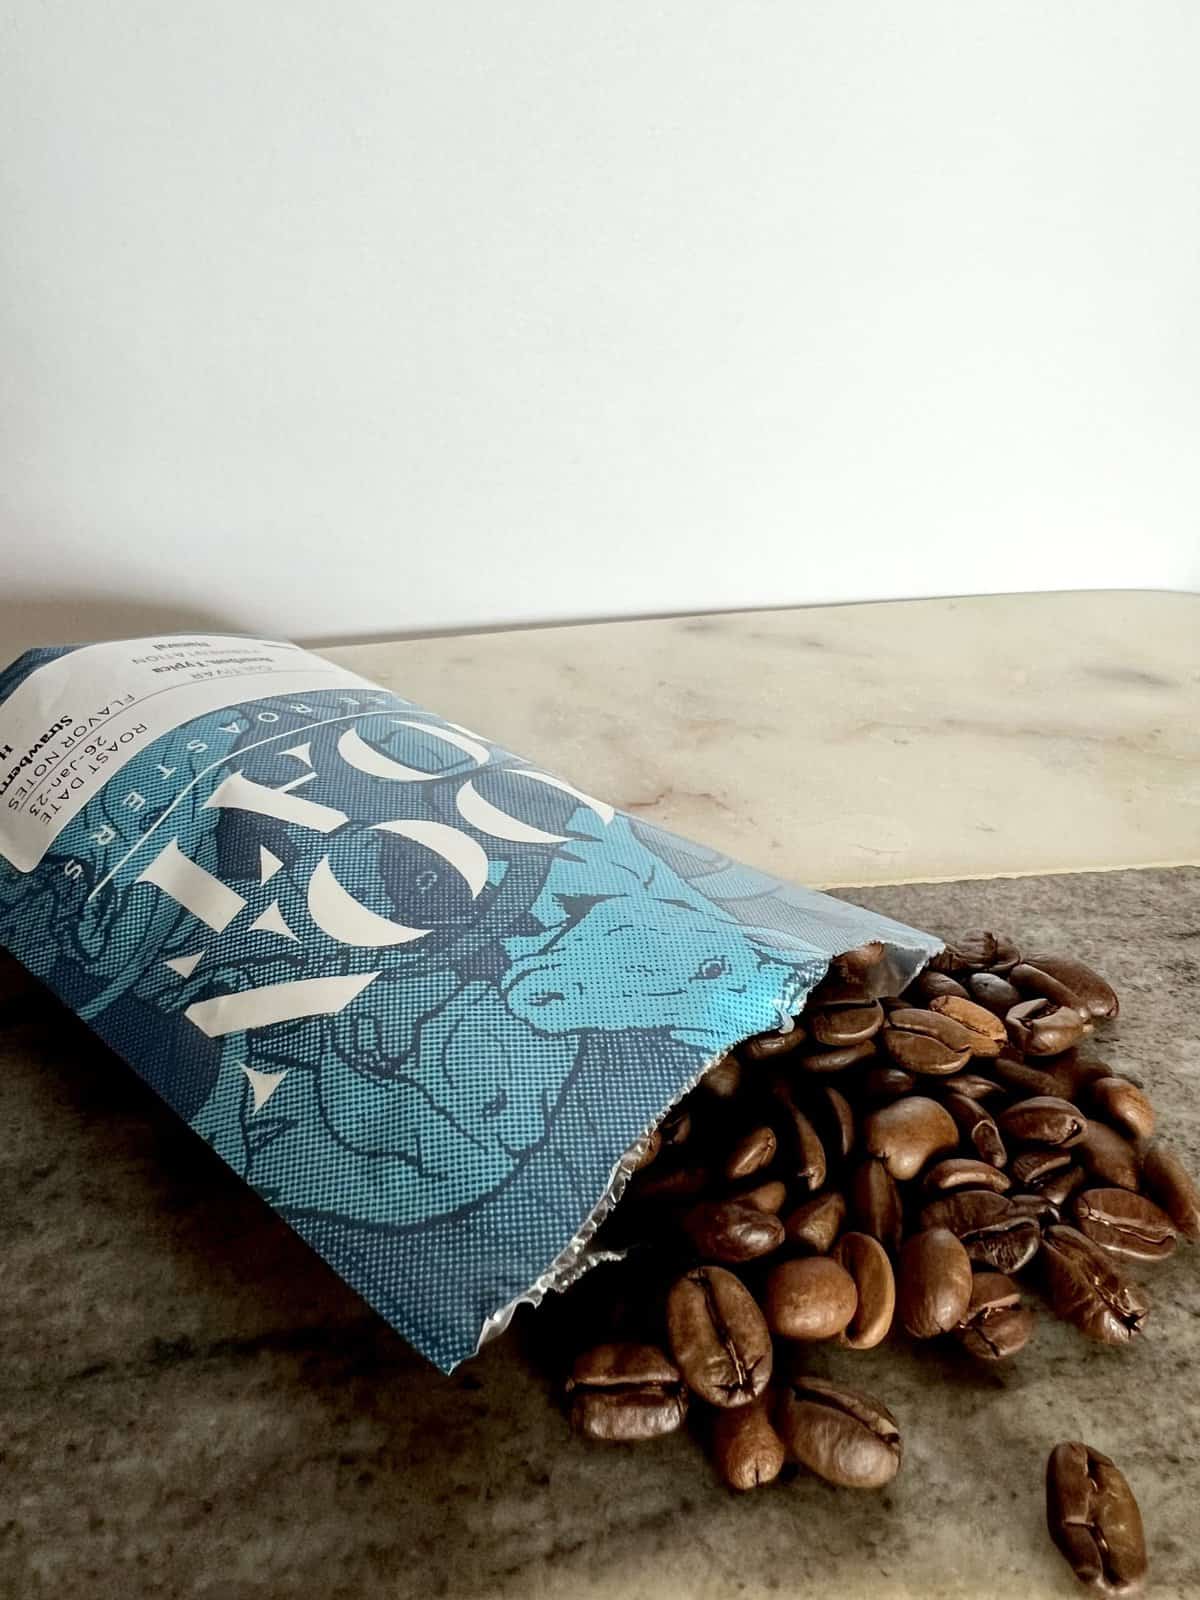 Bali-Natural-packaging-with-coffee-beans-next-to-it-scaled